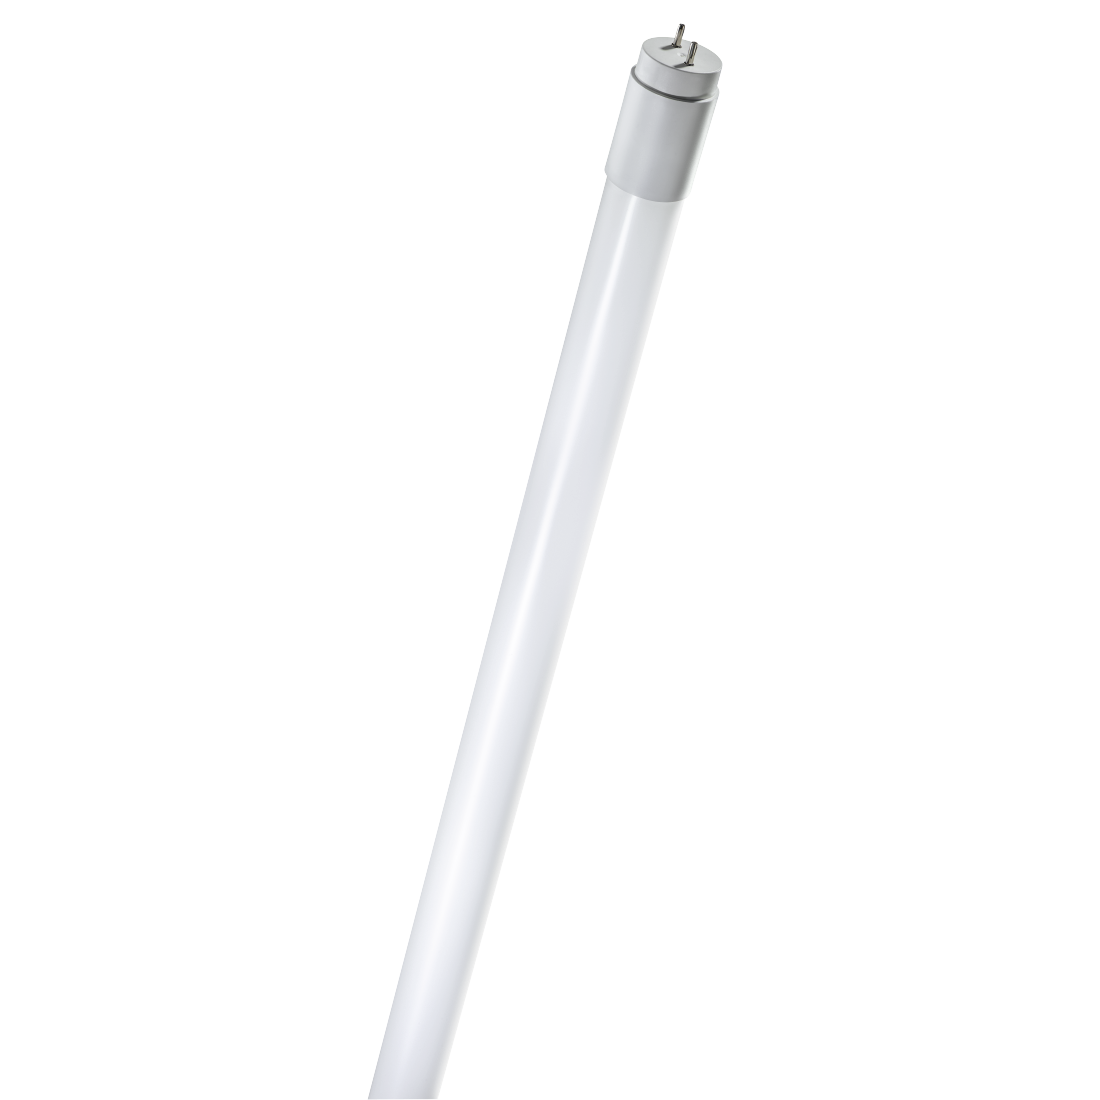 abx High-Res Image - Xavax, LED Bulb, G13, 2880 lm Replaces 58 W, Tube Bulb T8, 150 cm, daylight, Glass